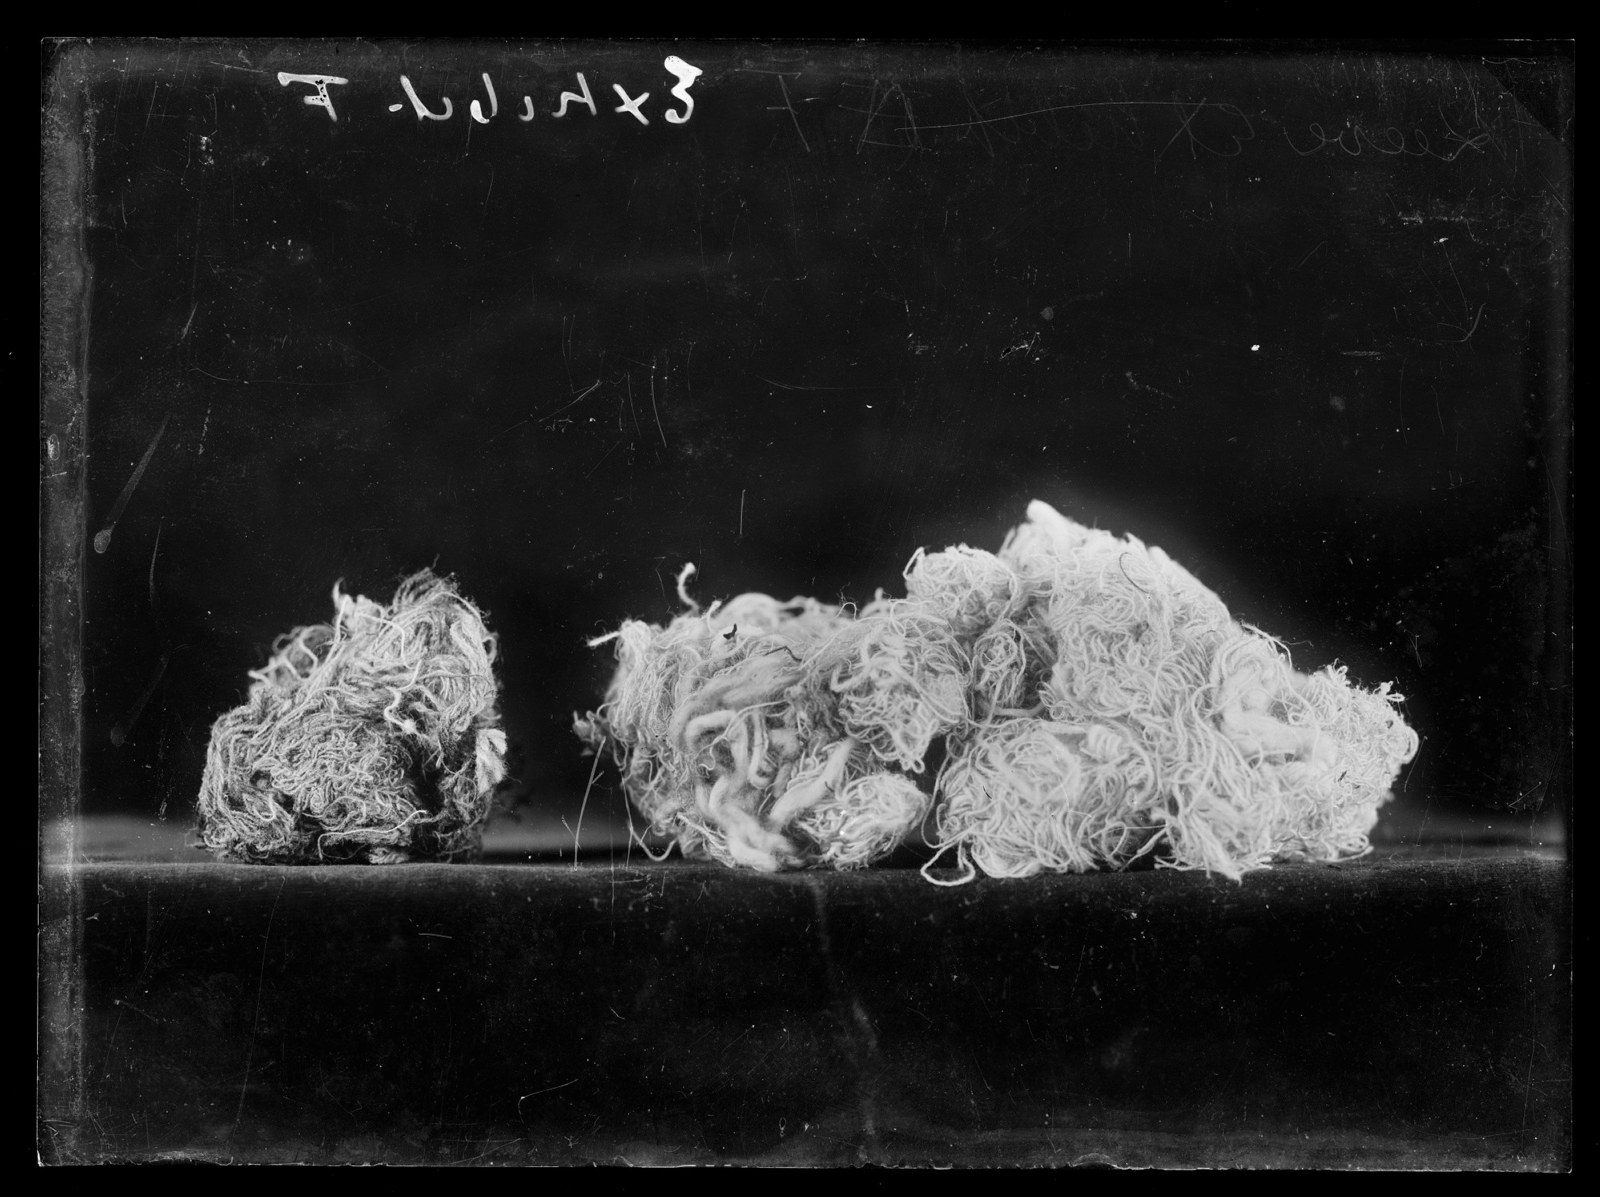 Two bundles of cotton fibres photographed in front of a dark background, presumably a police exhibit presented in the trial of the 'IWW Twelve', Sydney, 1919.